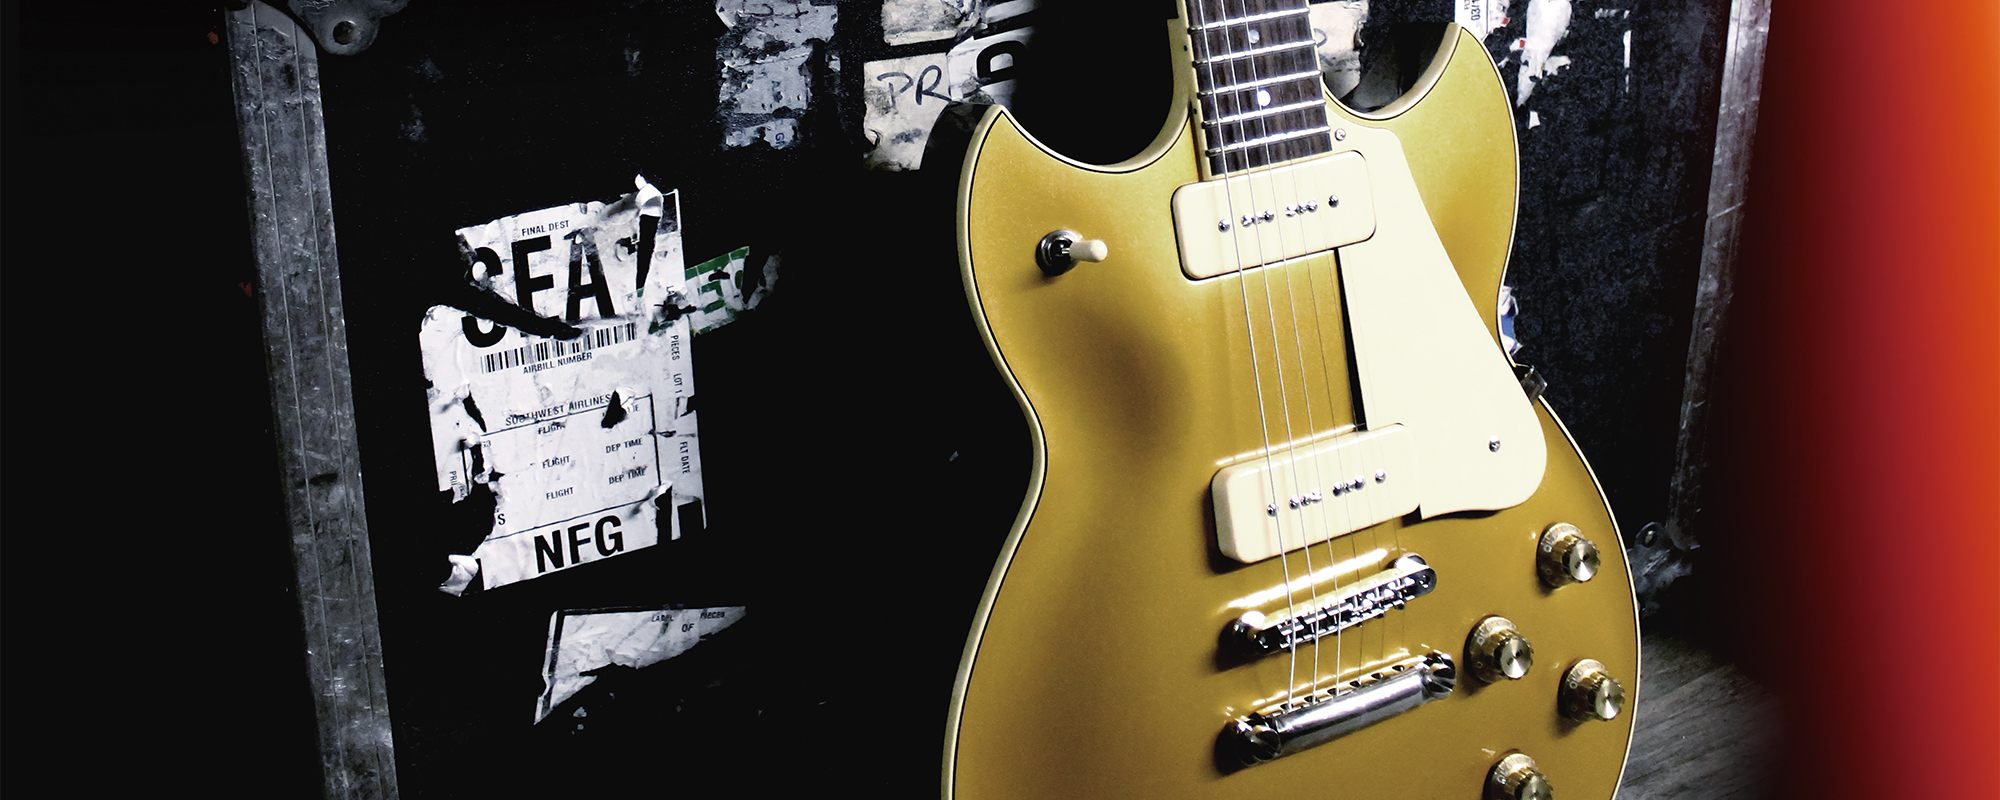 SG - Overview - Electric Guitars - Guitars